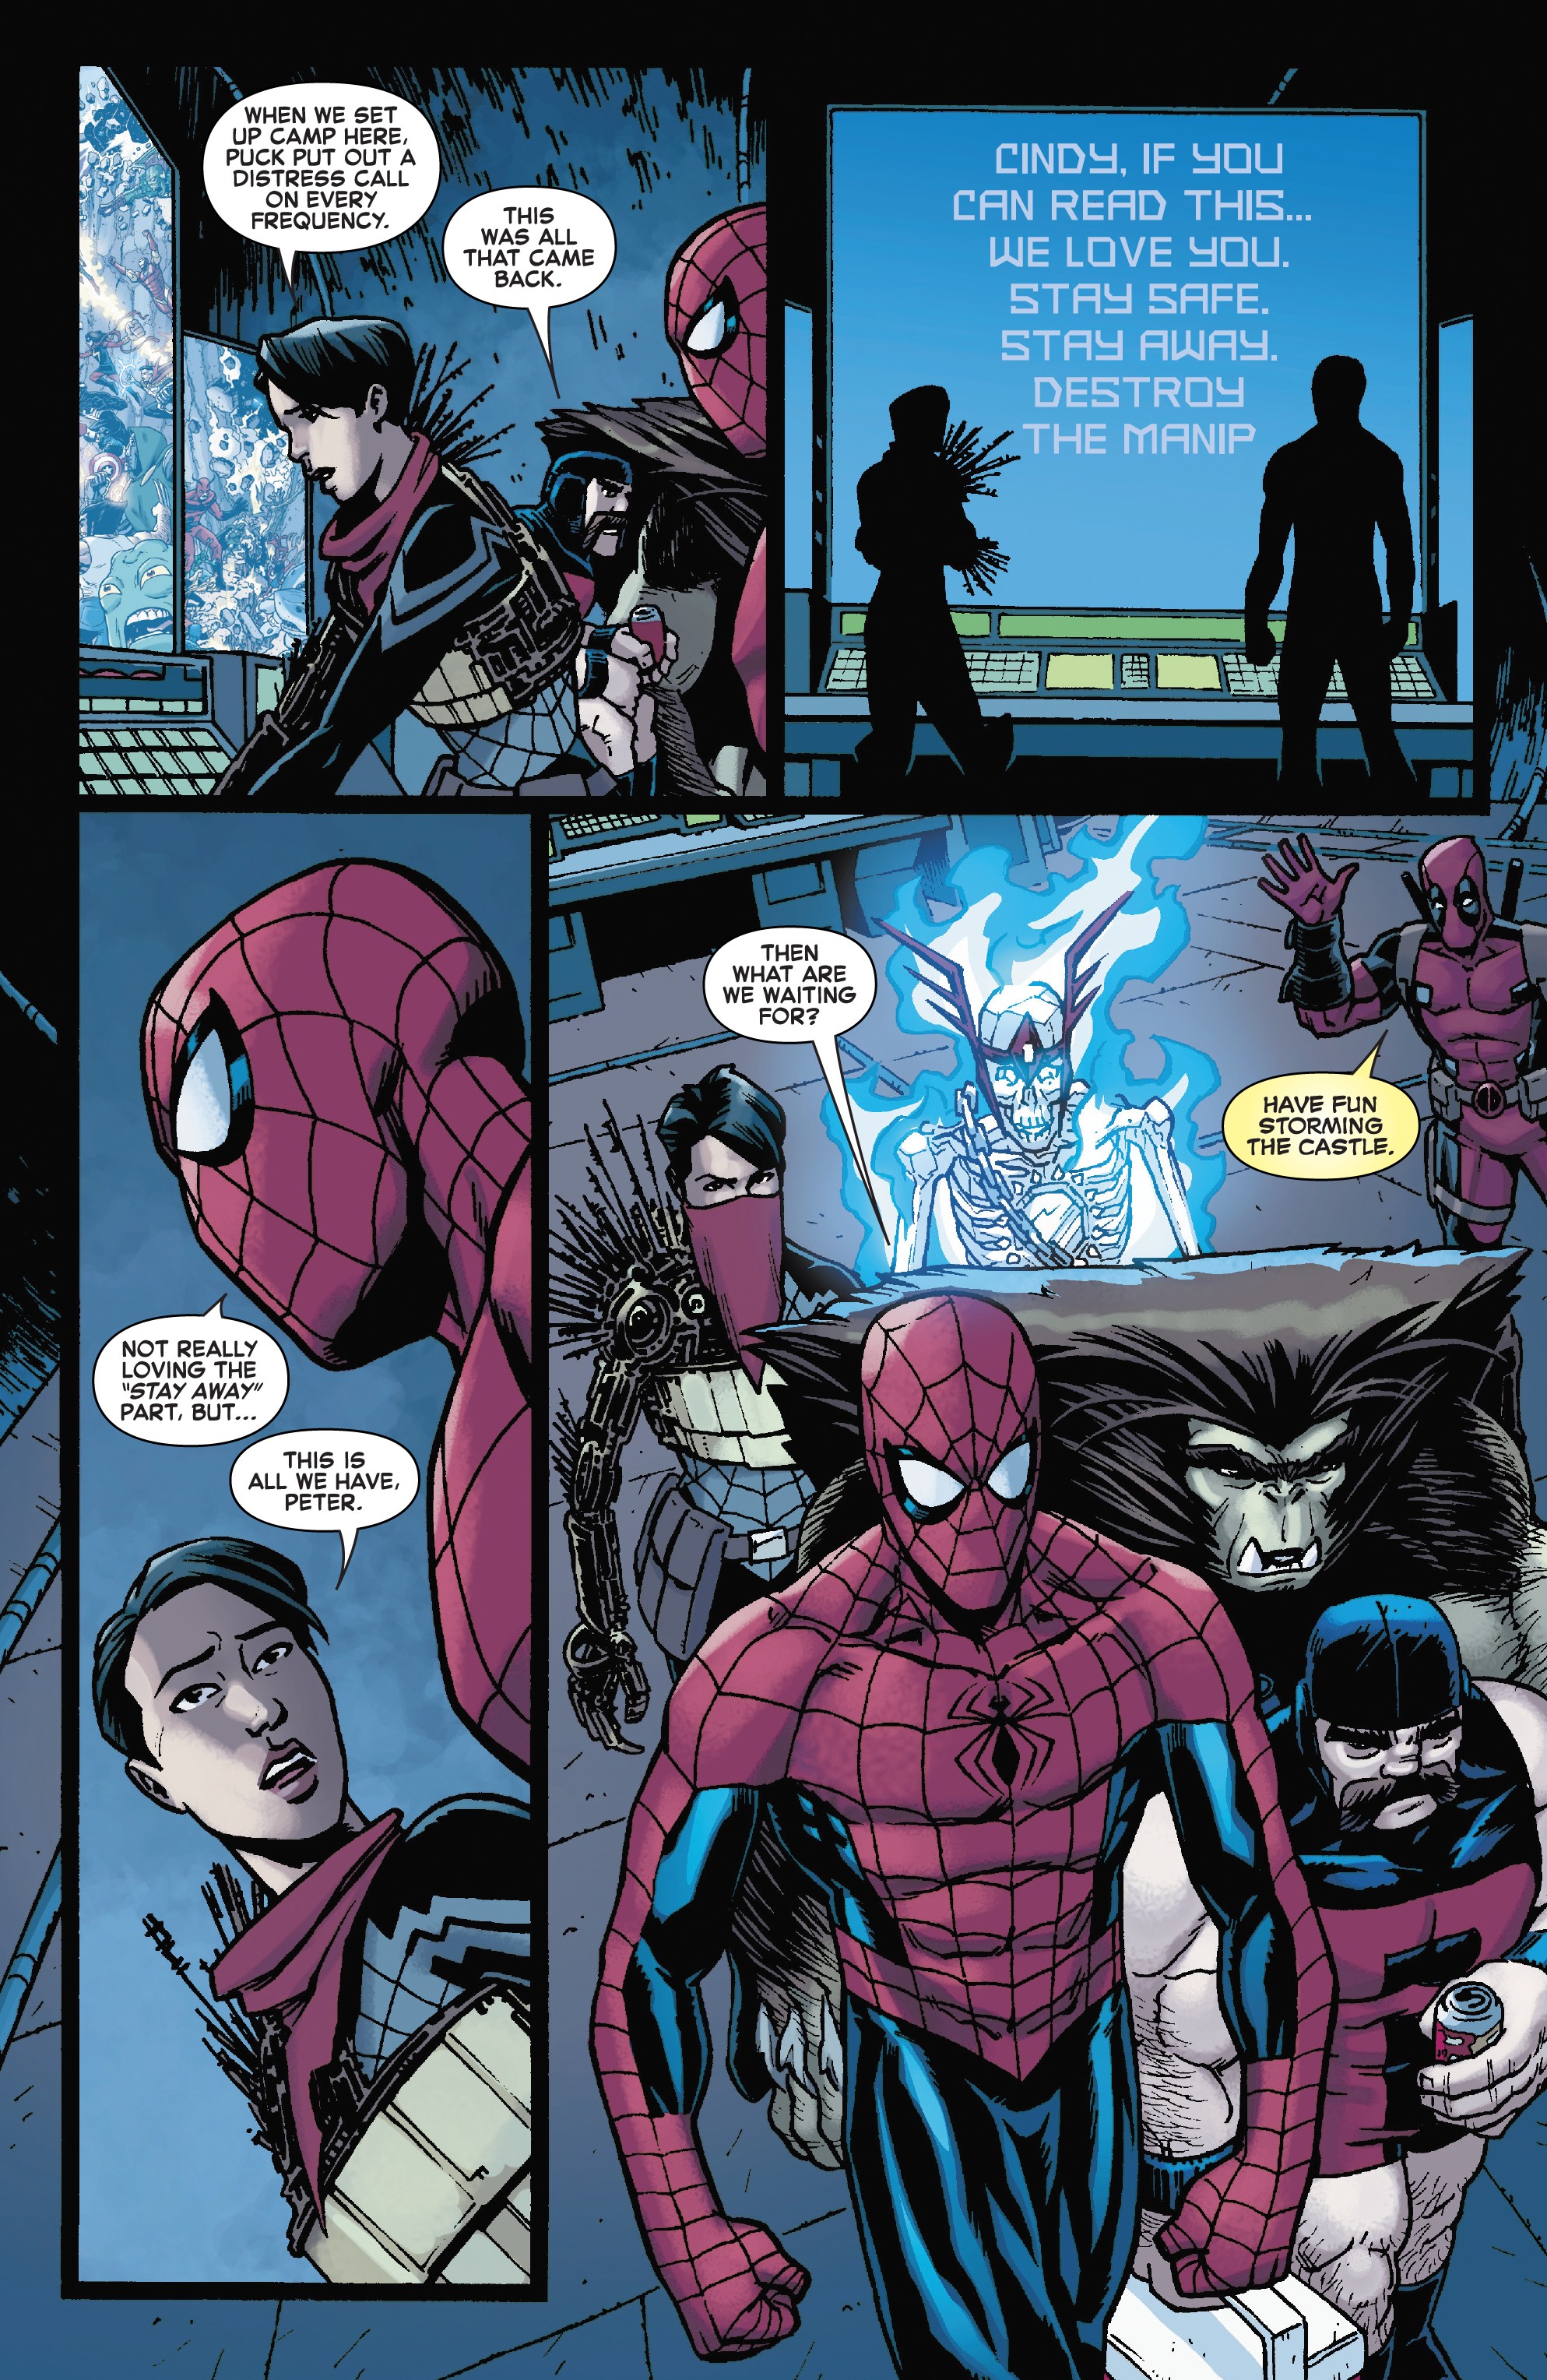 Spider Man Deadpool Issue 47 | Read Spider Man Deadpool Issue 47 comic  online in high quality. Read Full Comic online for free - Read comics online  in high quality .| READ COMIC ONLINE